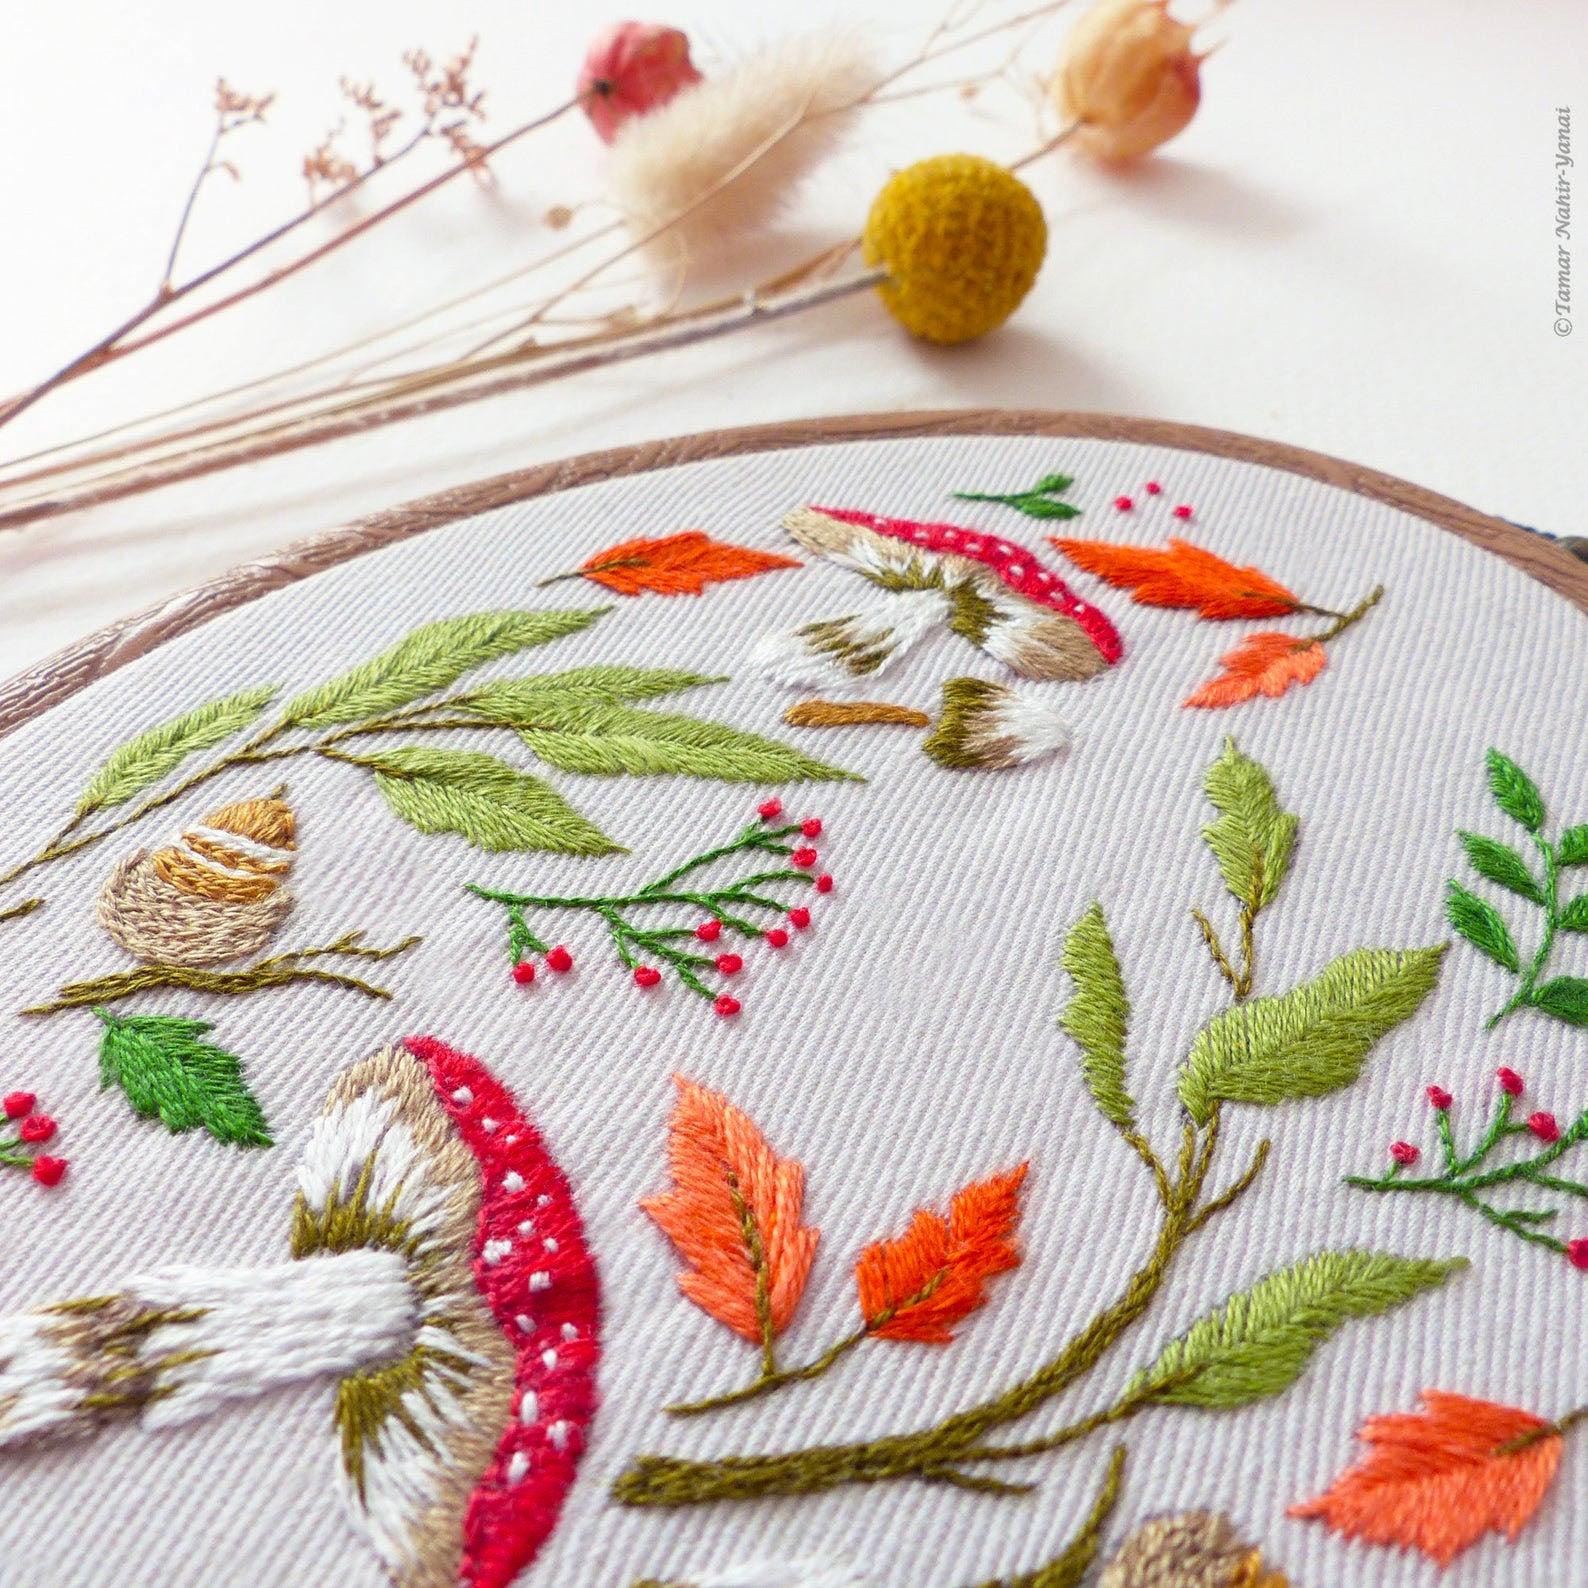  MANYUN Hand Embroidery Kit for Beginners, Cross-Stitching  Enthusiasts Merry Chrismas DIY 24 Days of Handmade Embroidery with  Patterns, Beginners Embroidery kit for Adults